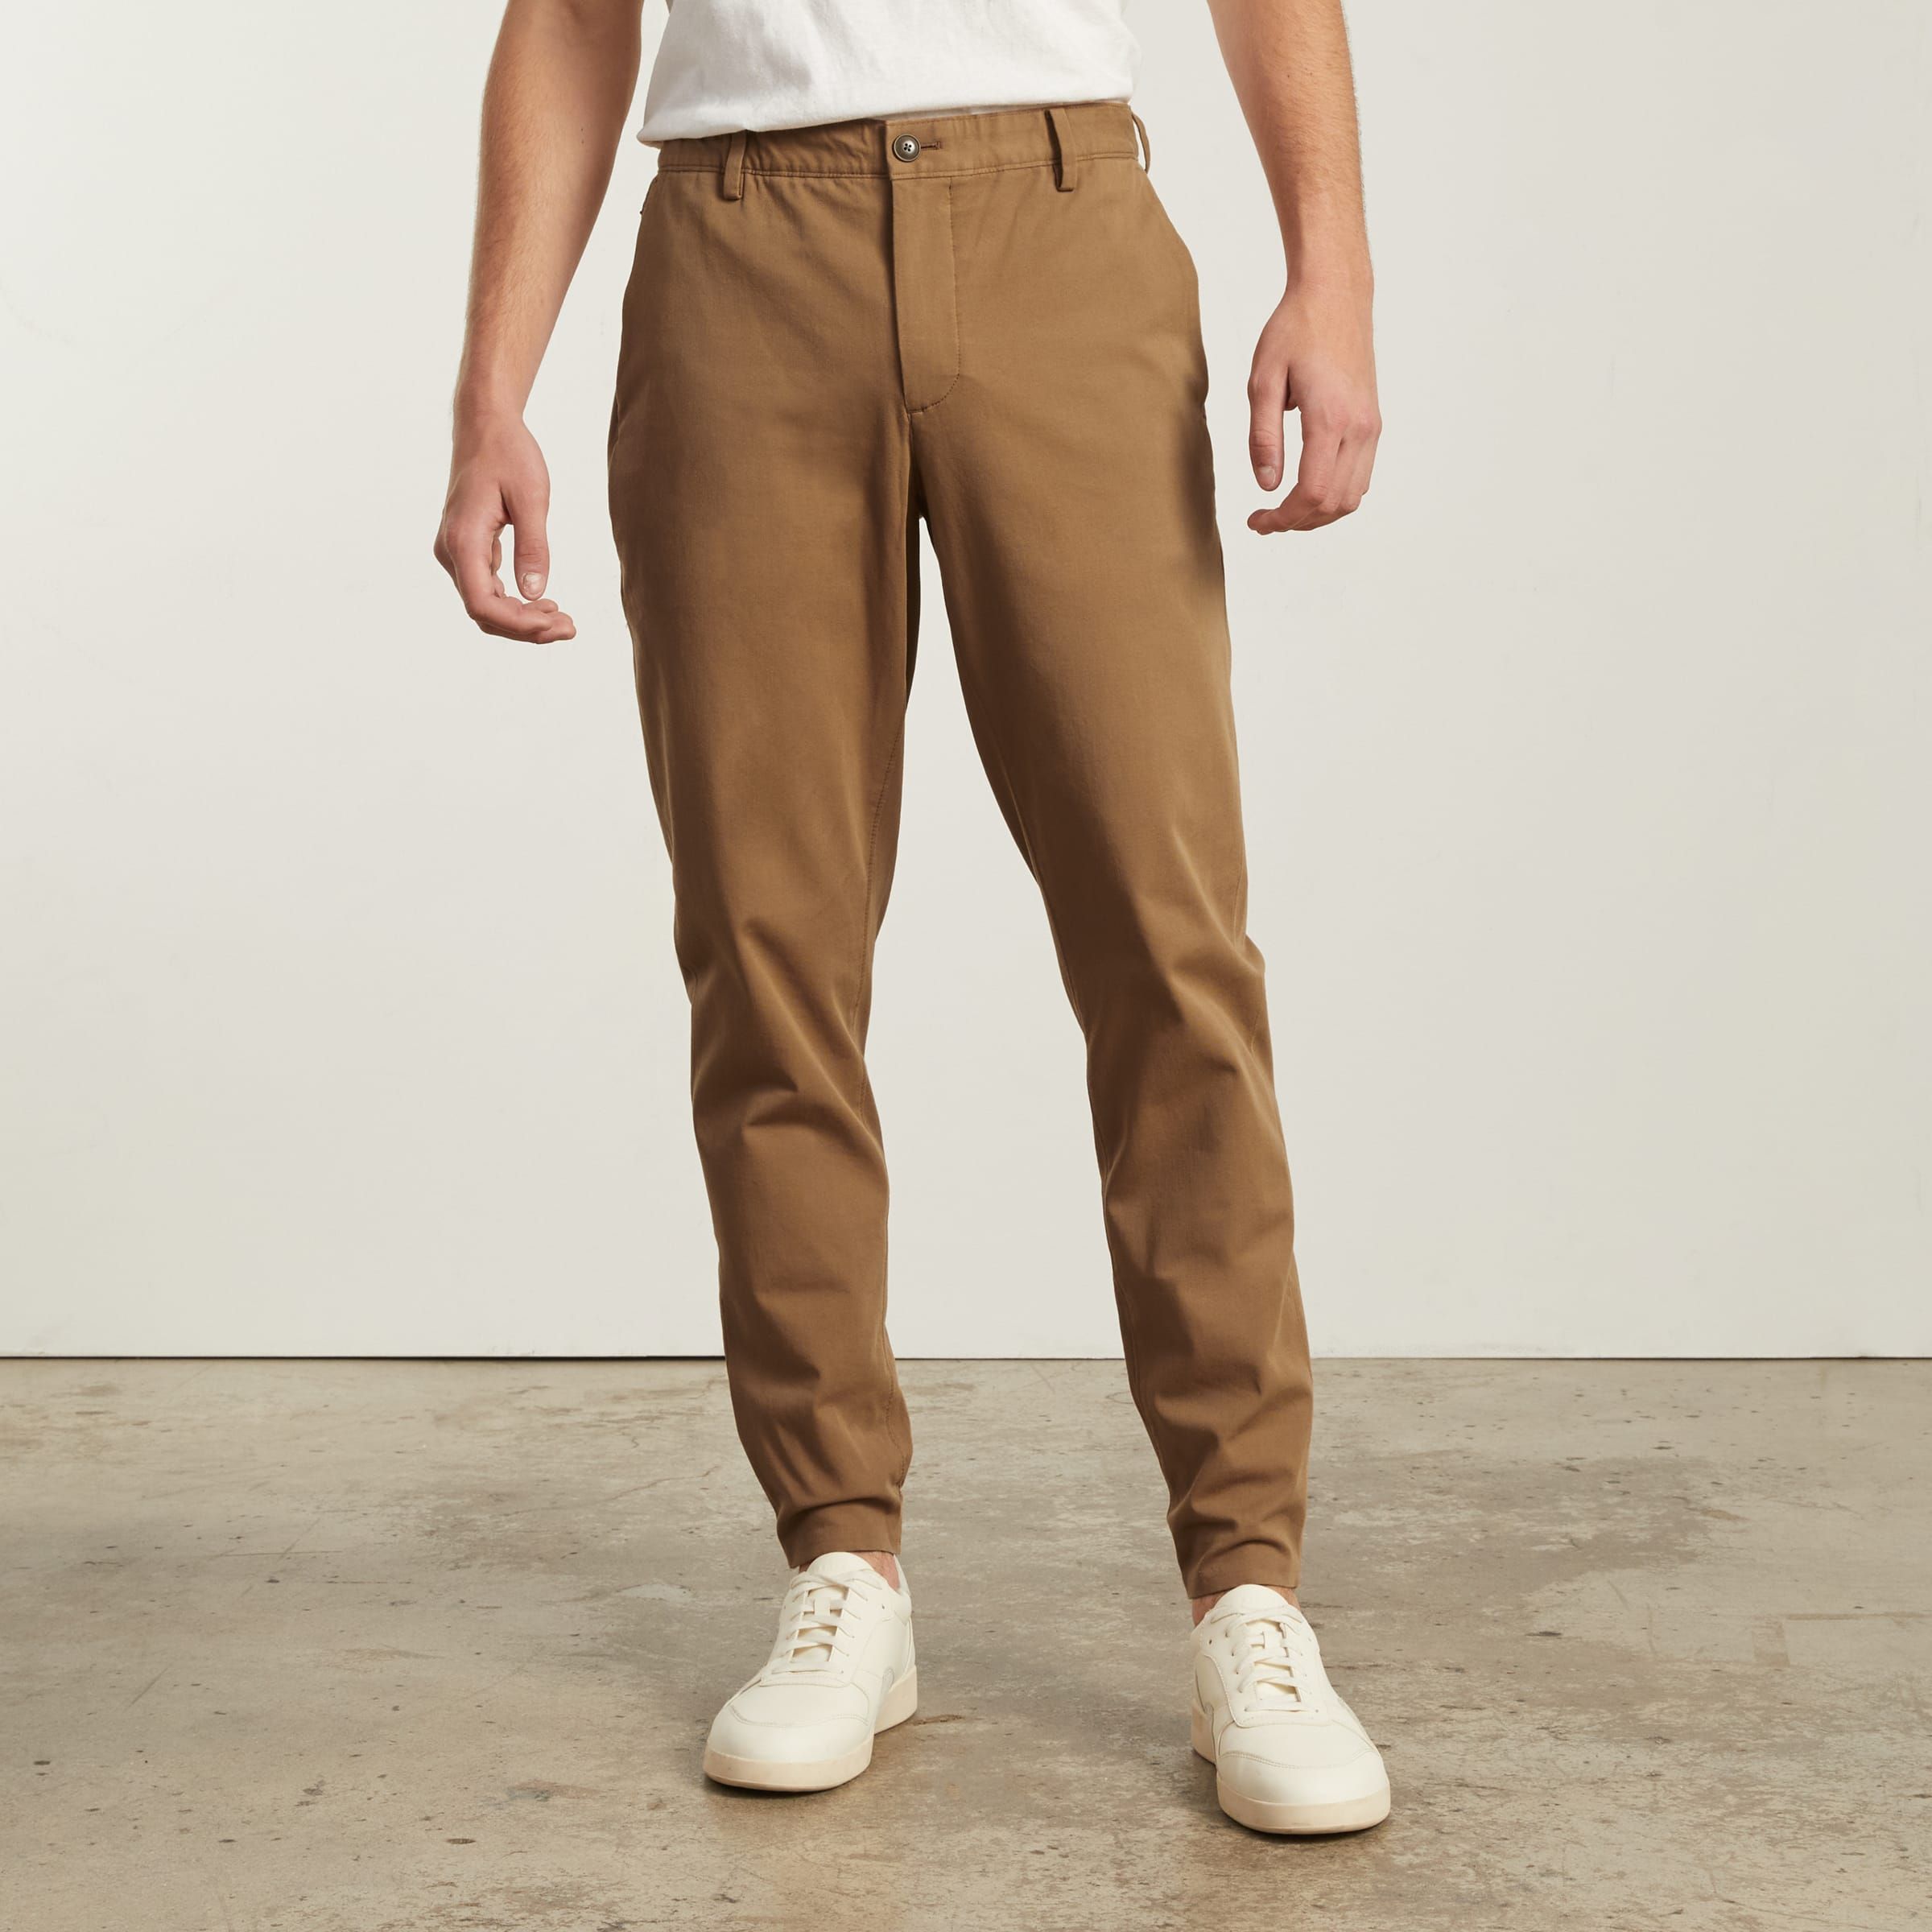 These Are the Best Travel Pants For Men - Dollar Flight Club